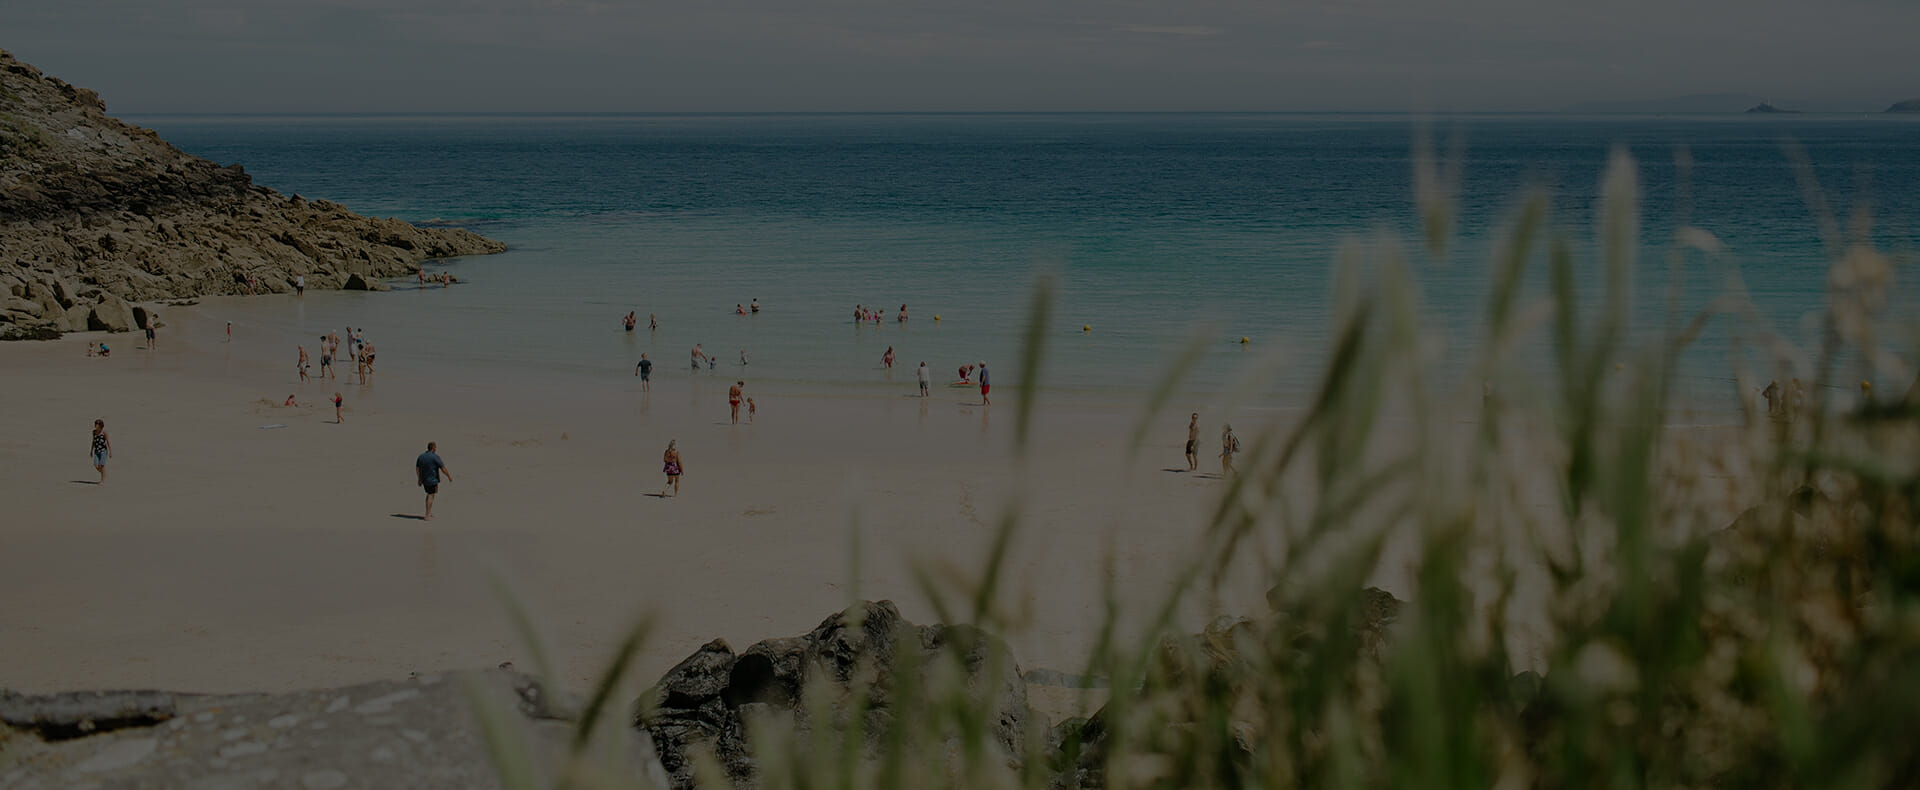 st ives beach with people walking on the sand and swimming in the sea